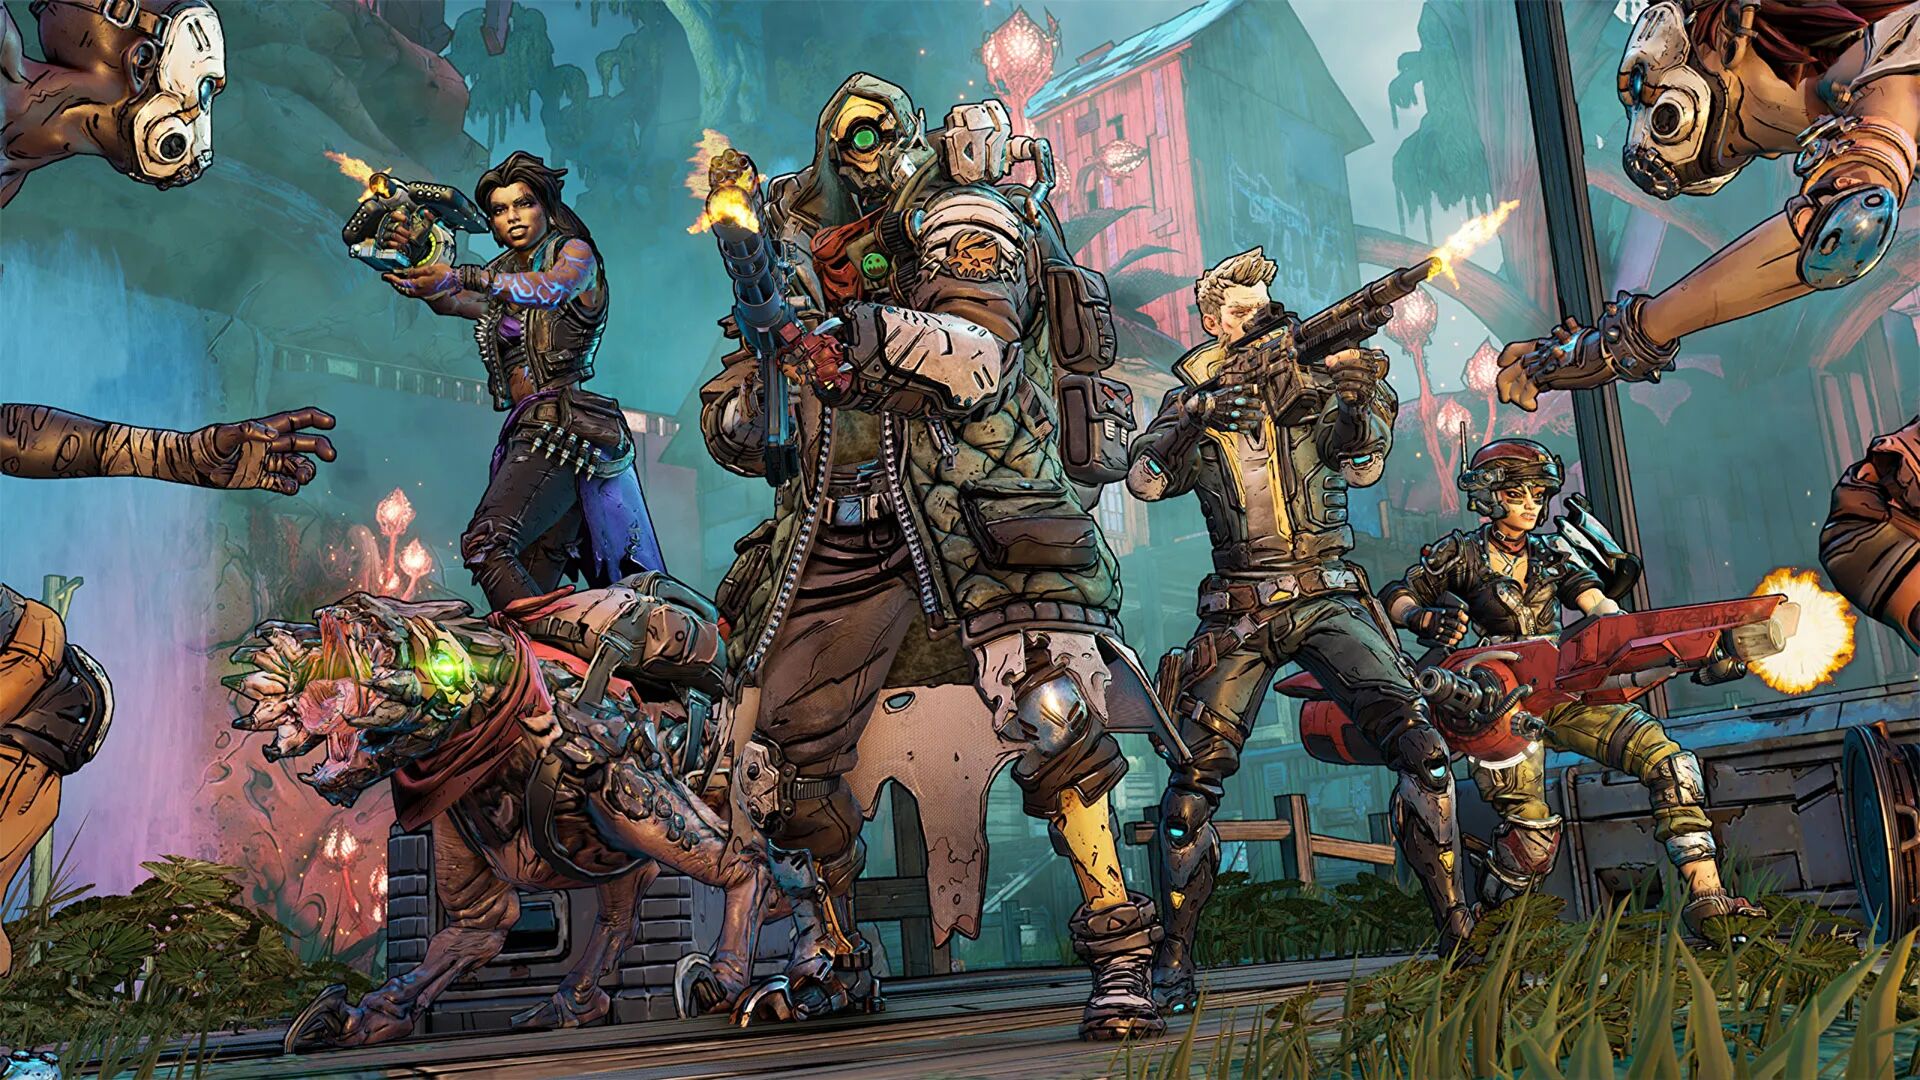 Borderlands 3 is free to keep on the Epic Games Store right now